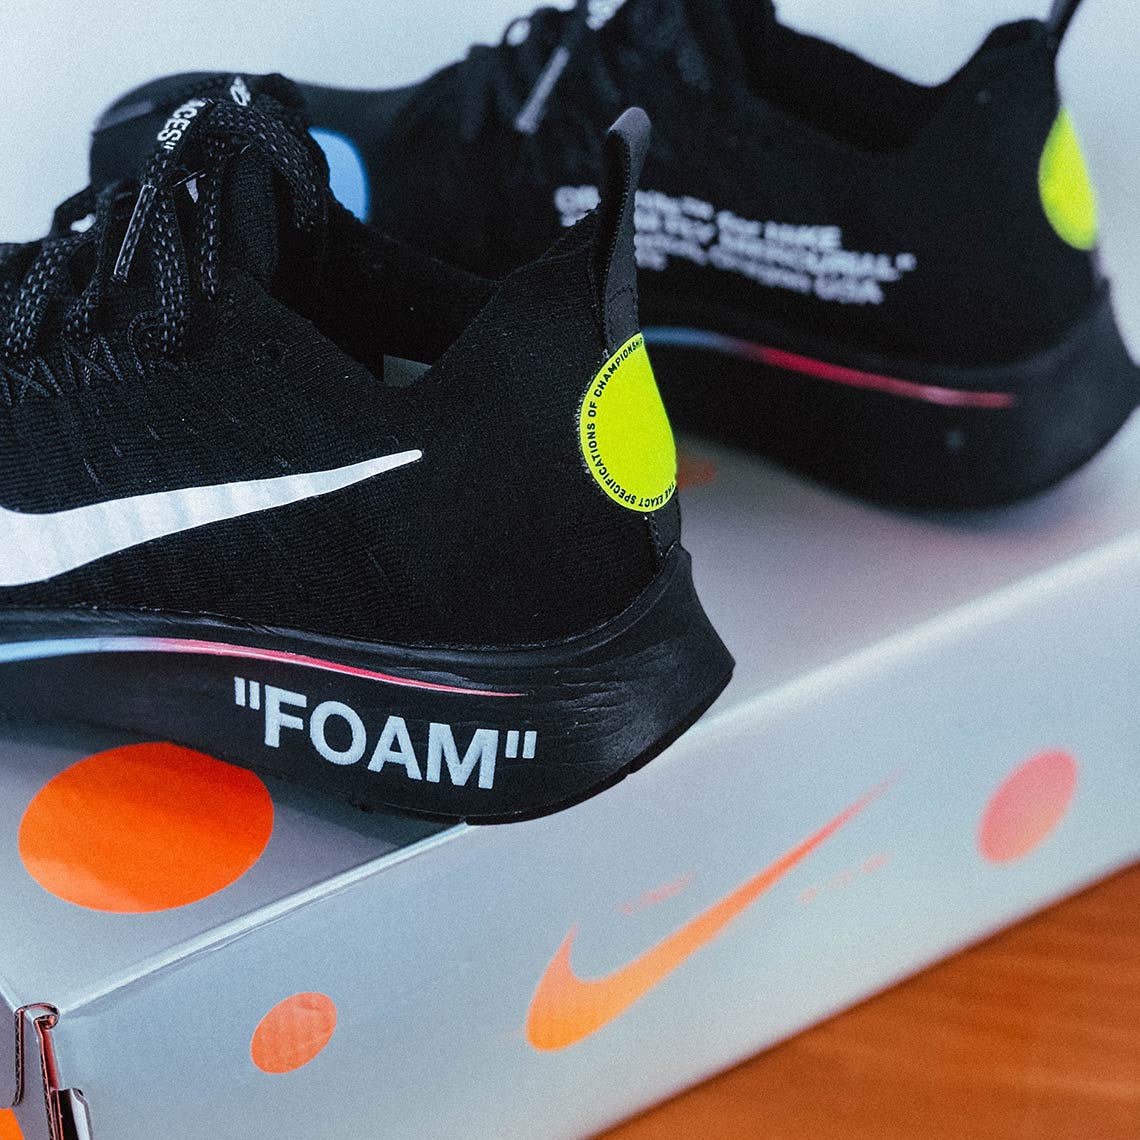 How to Get Virgil Abloh's Off-White x Nike Zoom Fly Mercurials